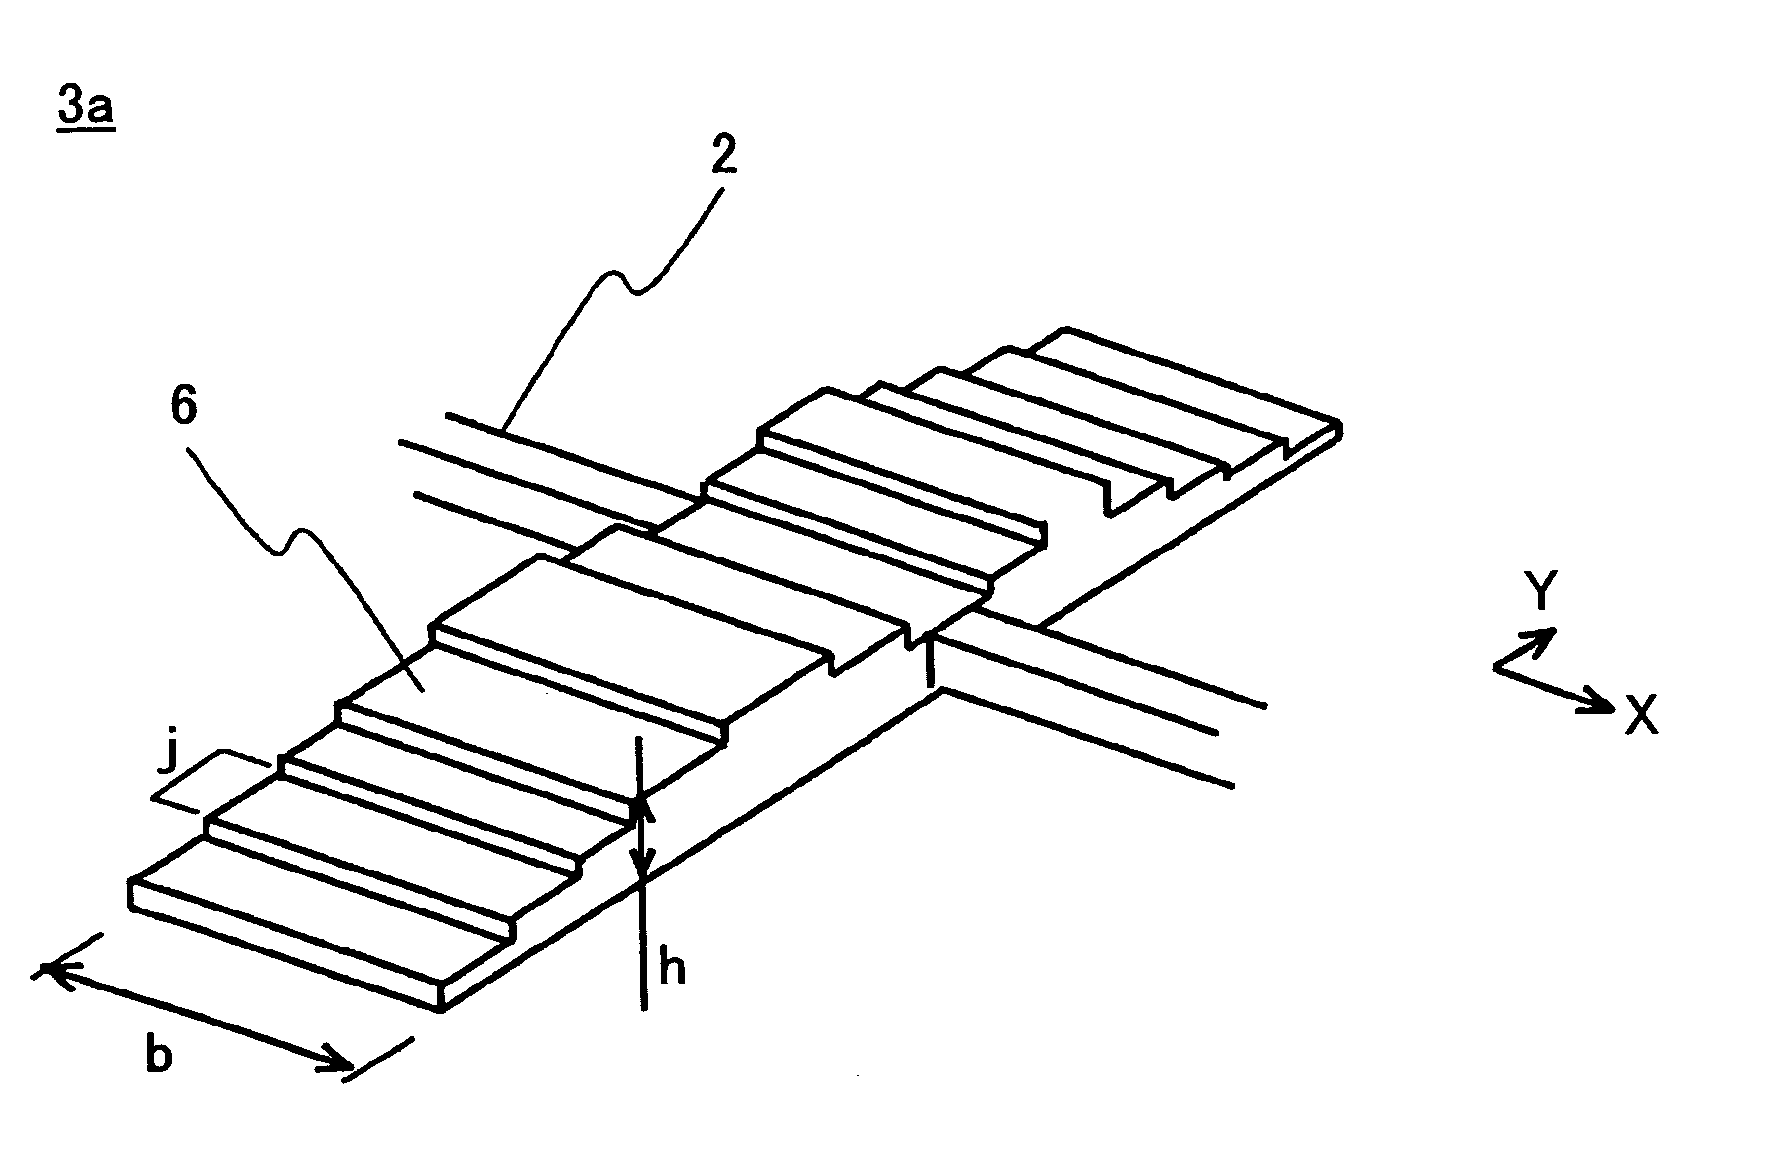 Deflector mirror with regions of different flexural rigidity